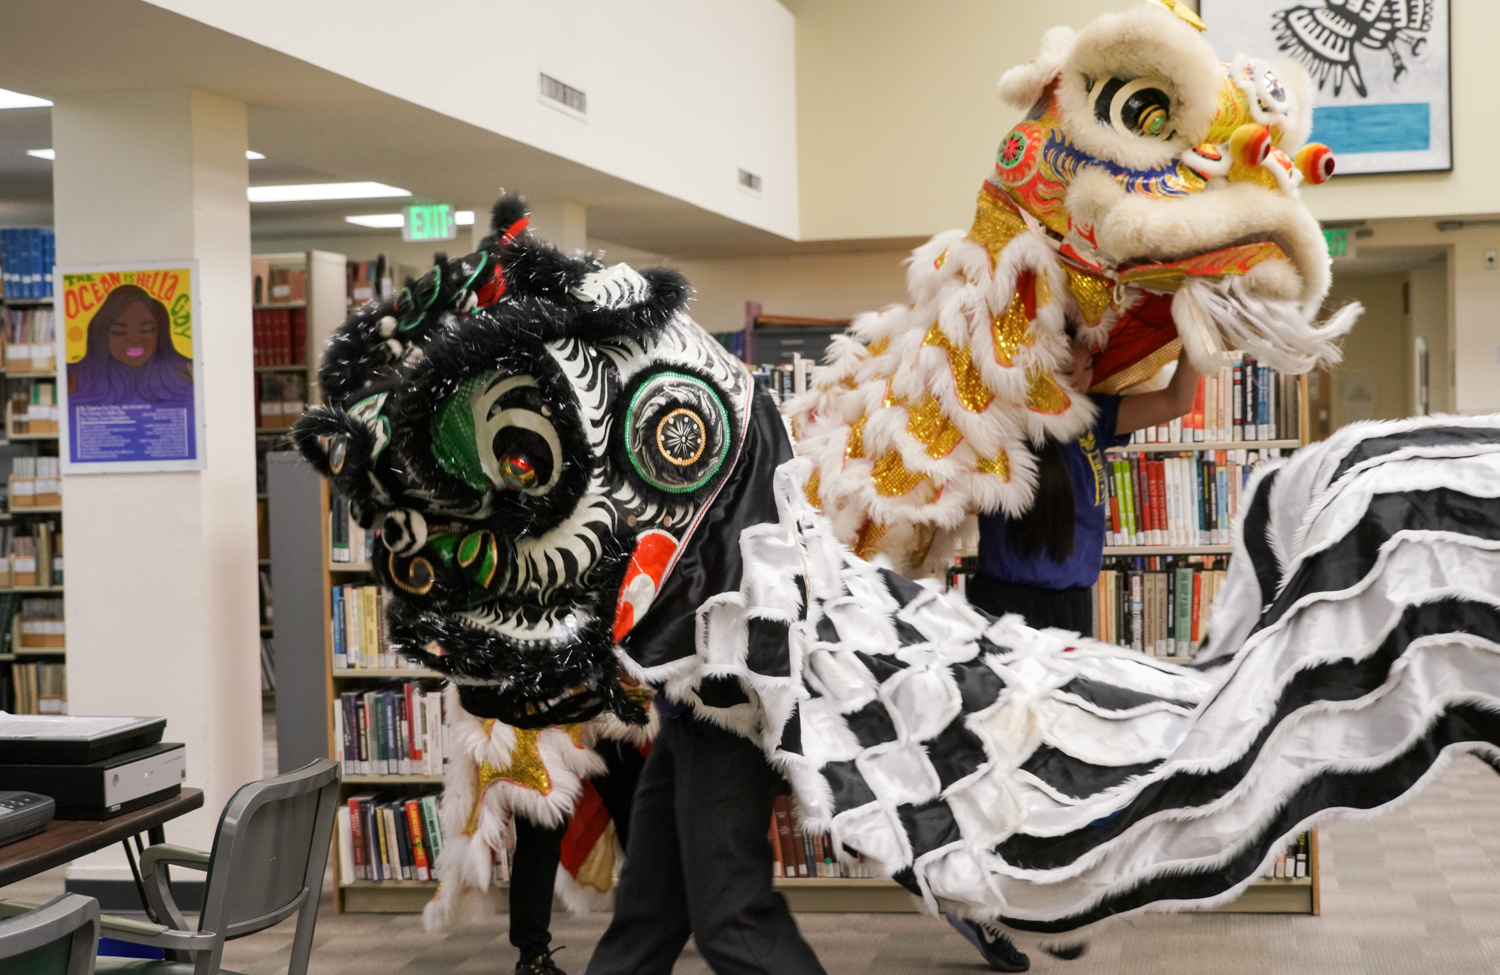 Lion dancers perform inside the Ethnic Studies Library.